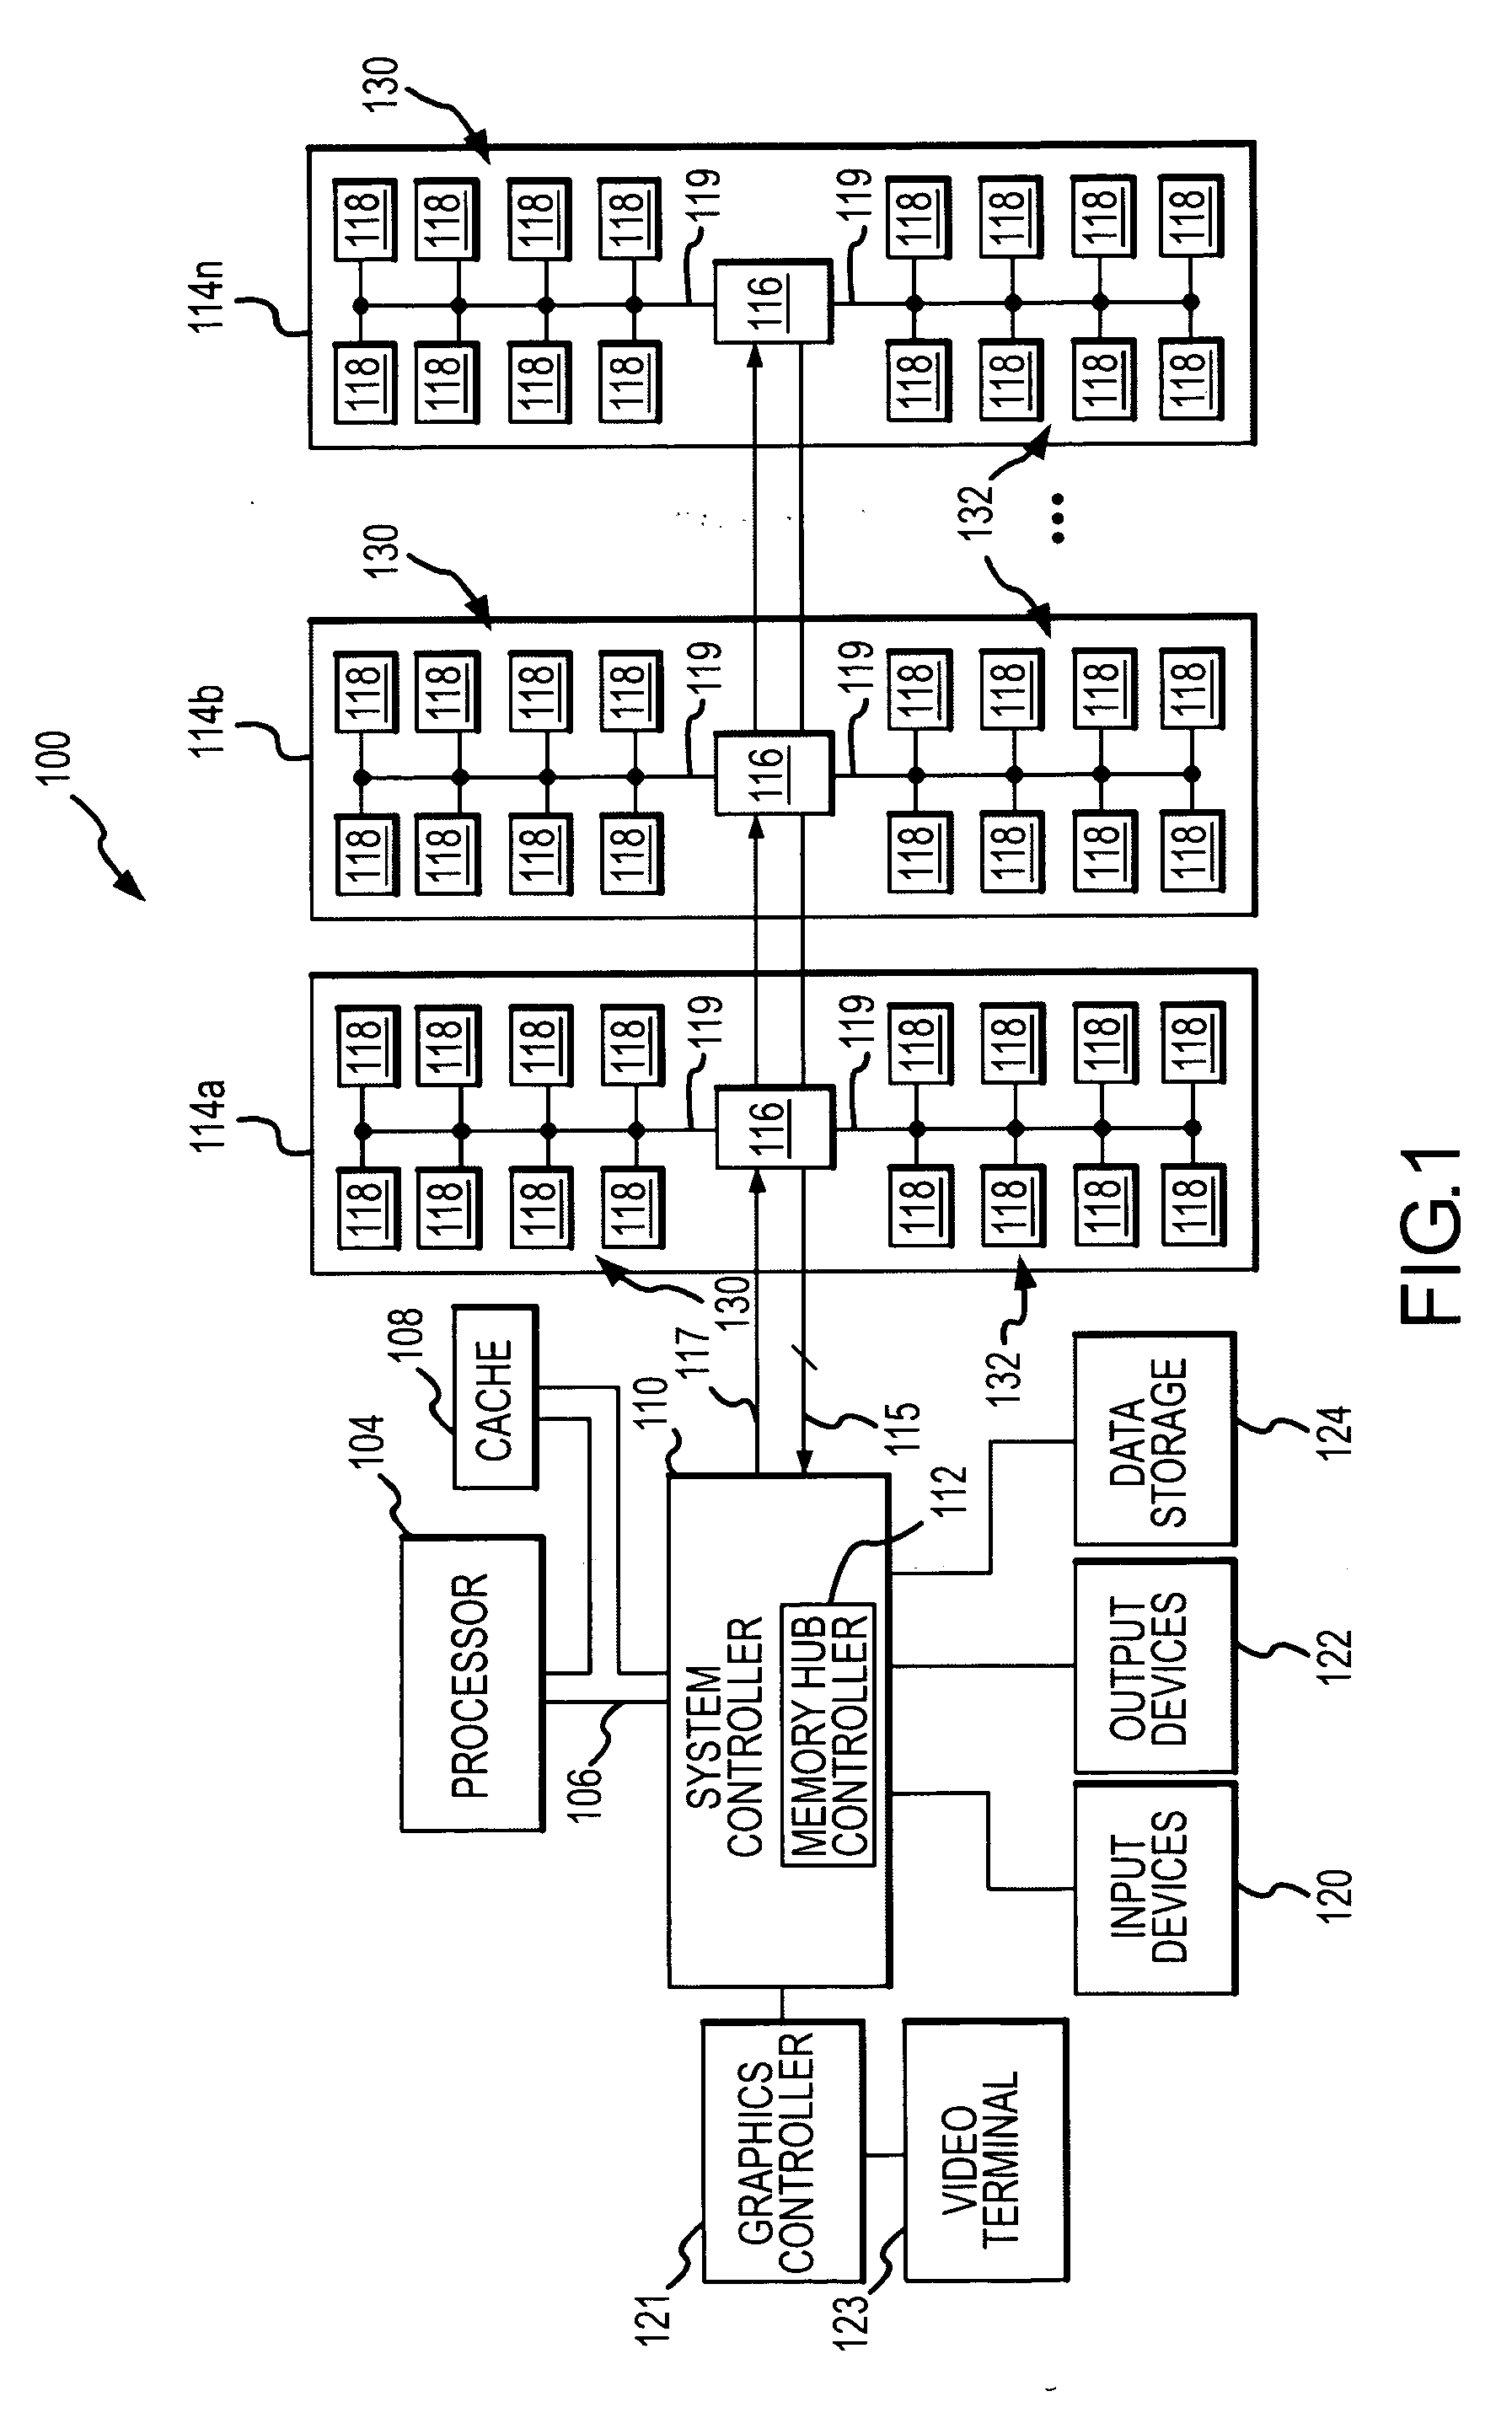 Memory hub system and method having large virtual page size